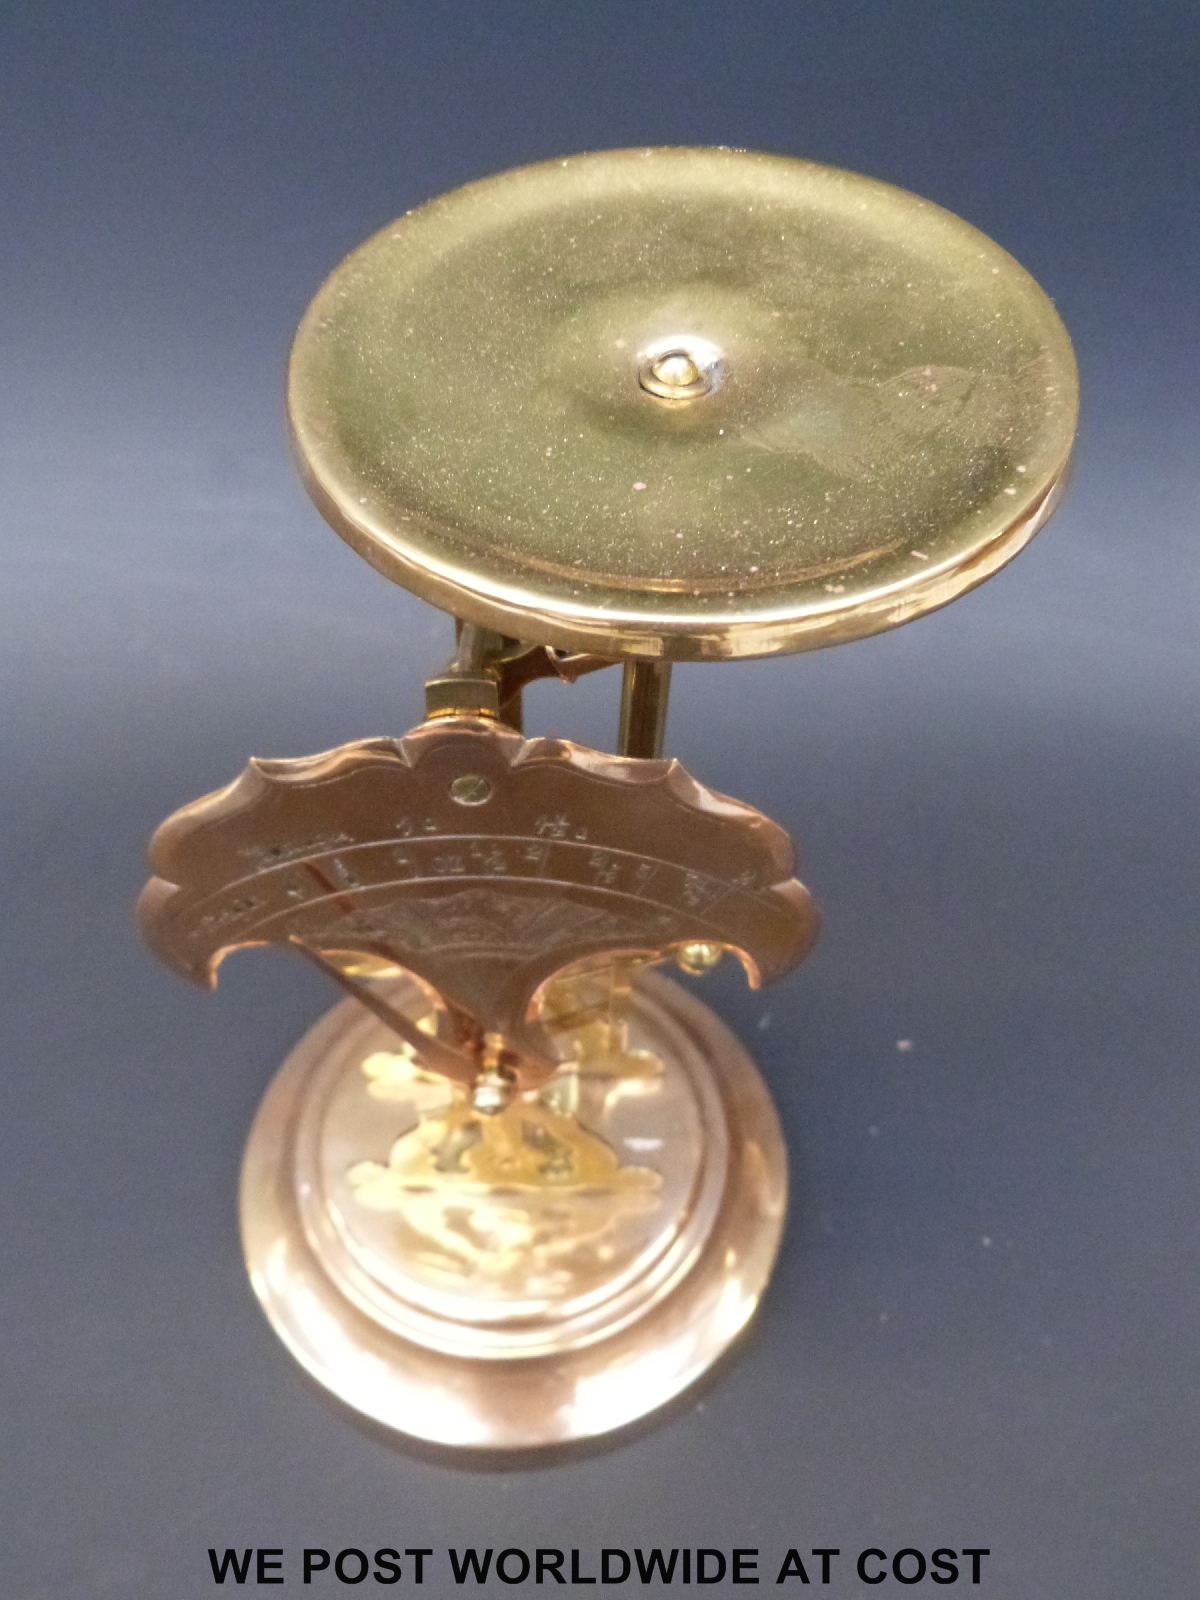 A set of brass/bronze postage scales with pendulum type swinging weight / dial design - Image 2 of 2